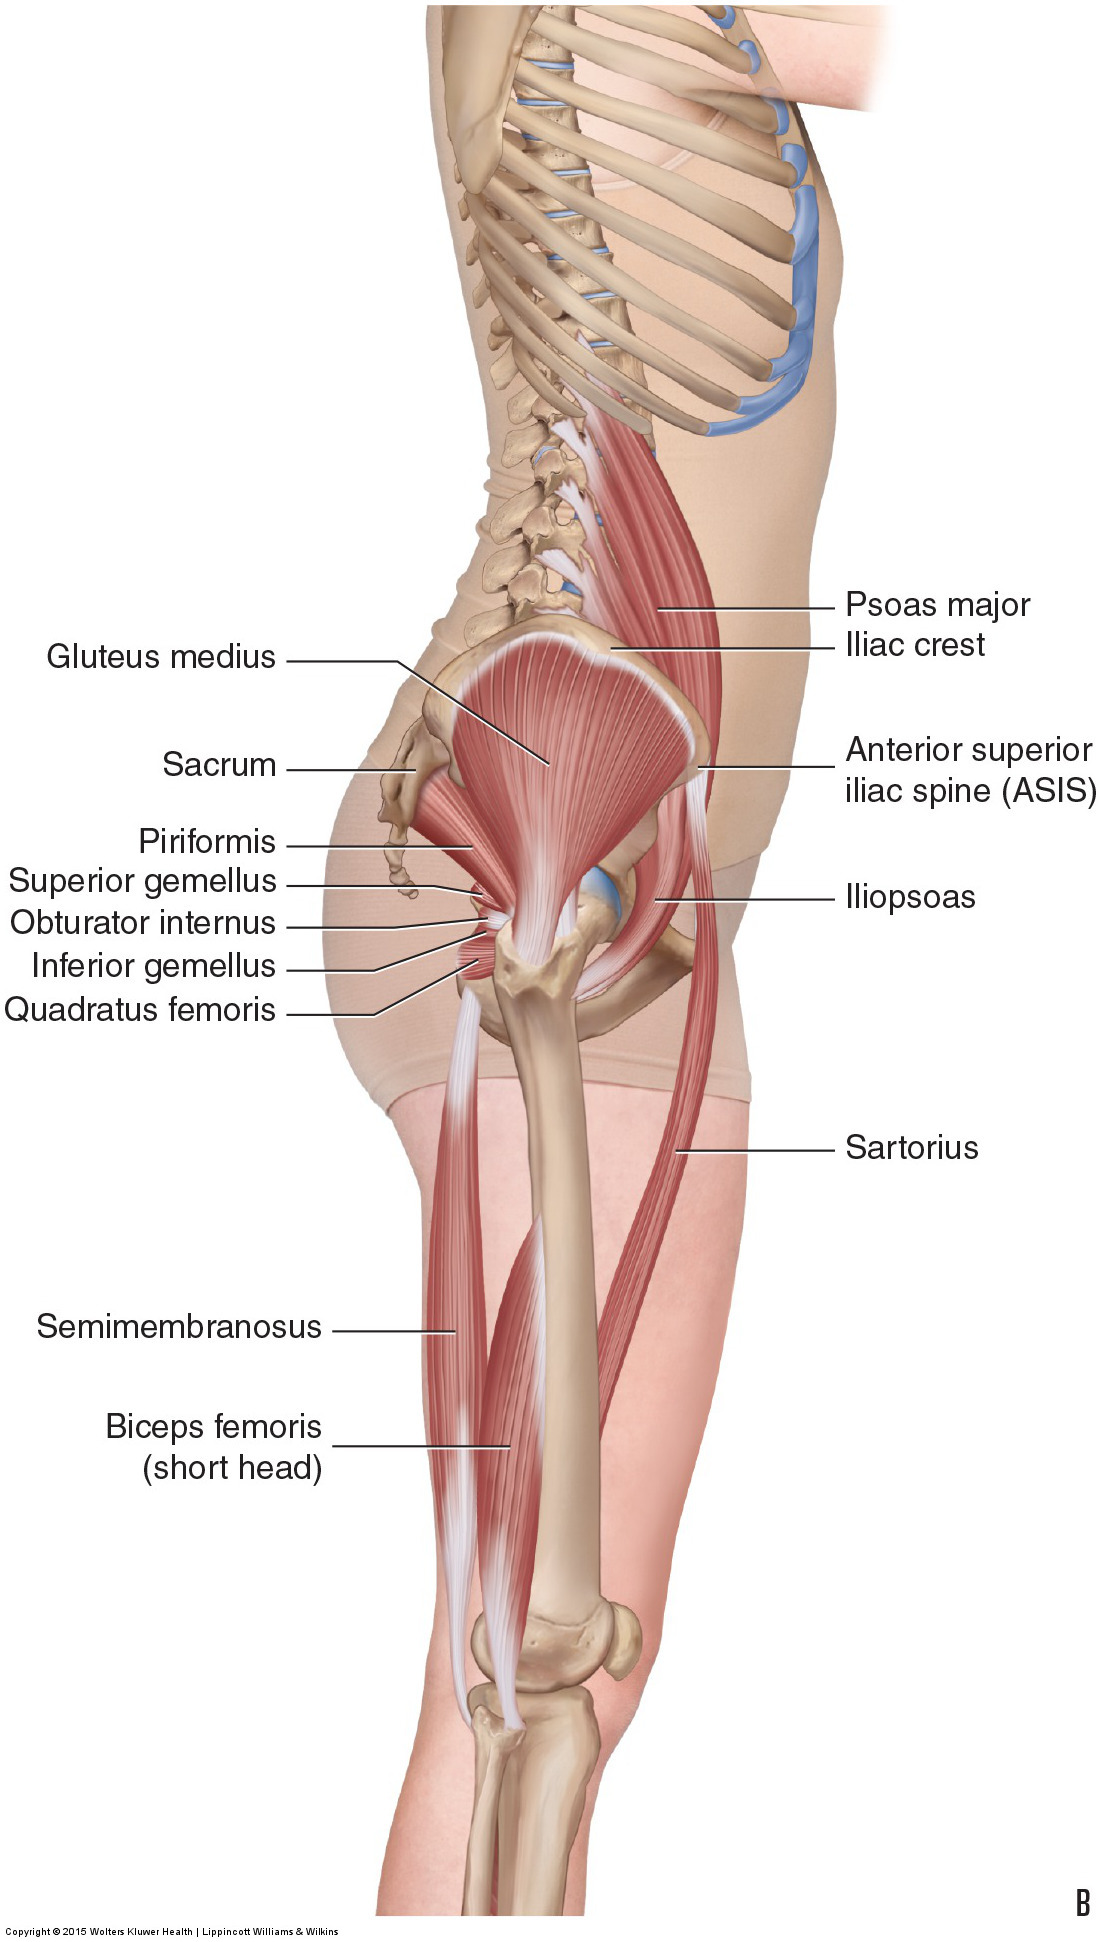 Anatomy Leg Hip Muscles Images - How To Guide And Refrence